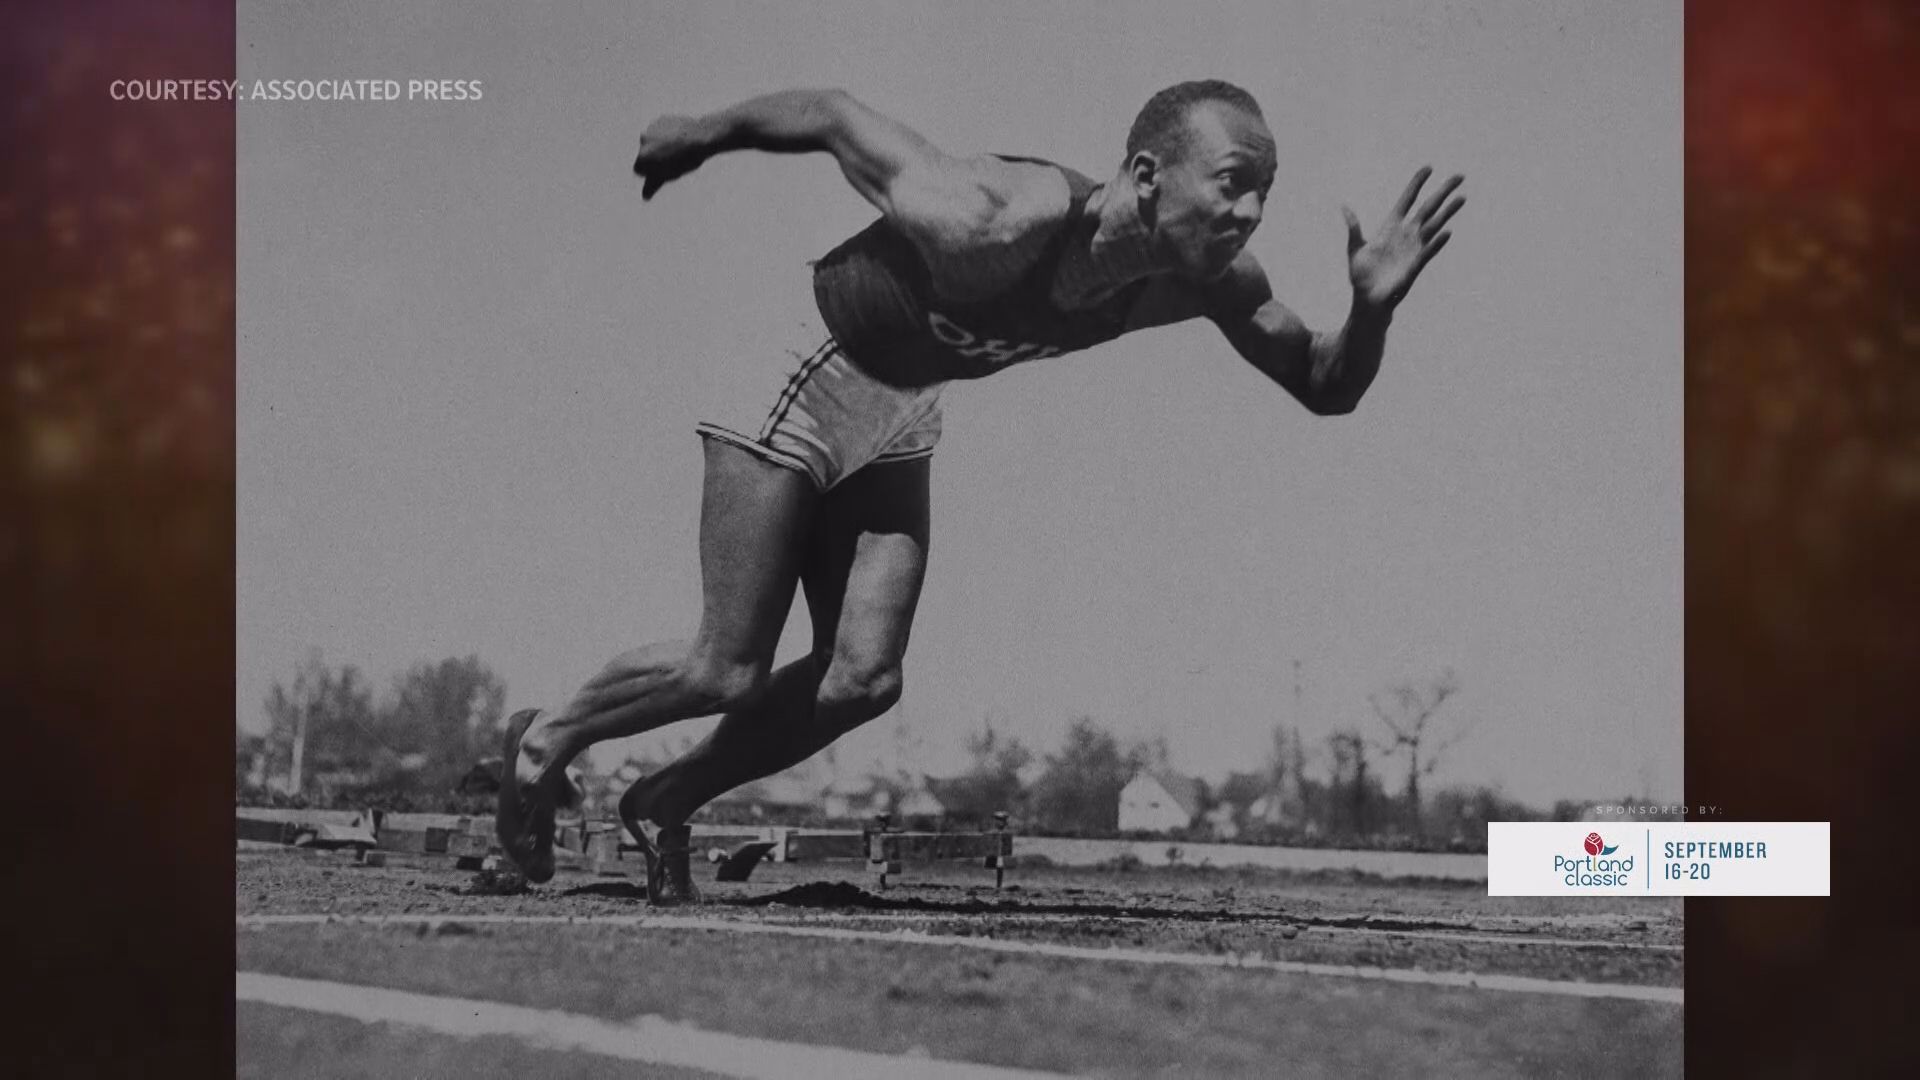 Jesse Owens, an iconic track and field Olympian, is a Black man who won four gold medals in Nazi Germany in the 1930s.